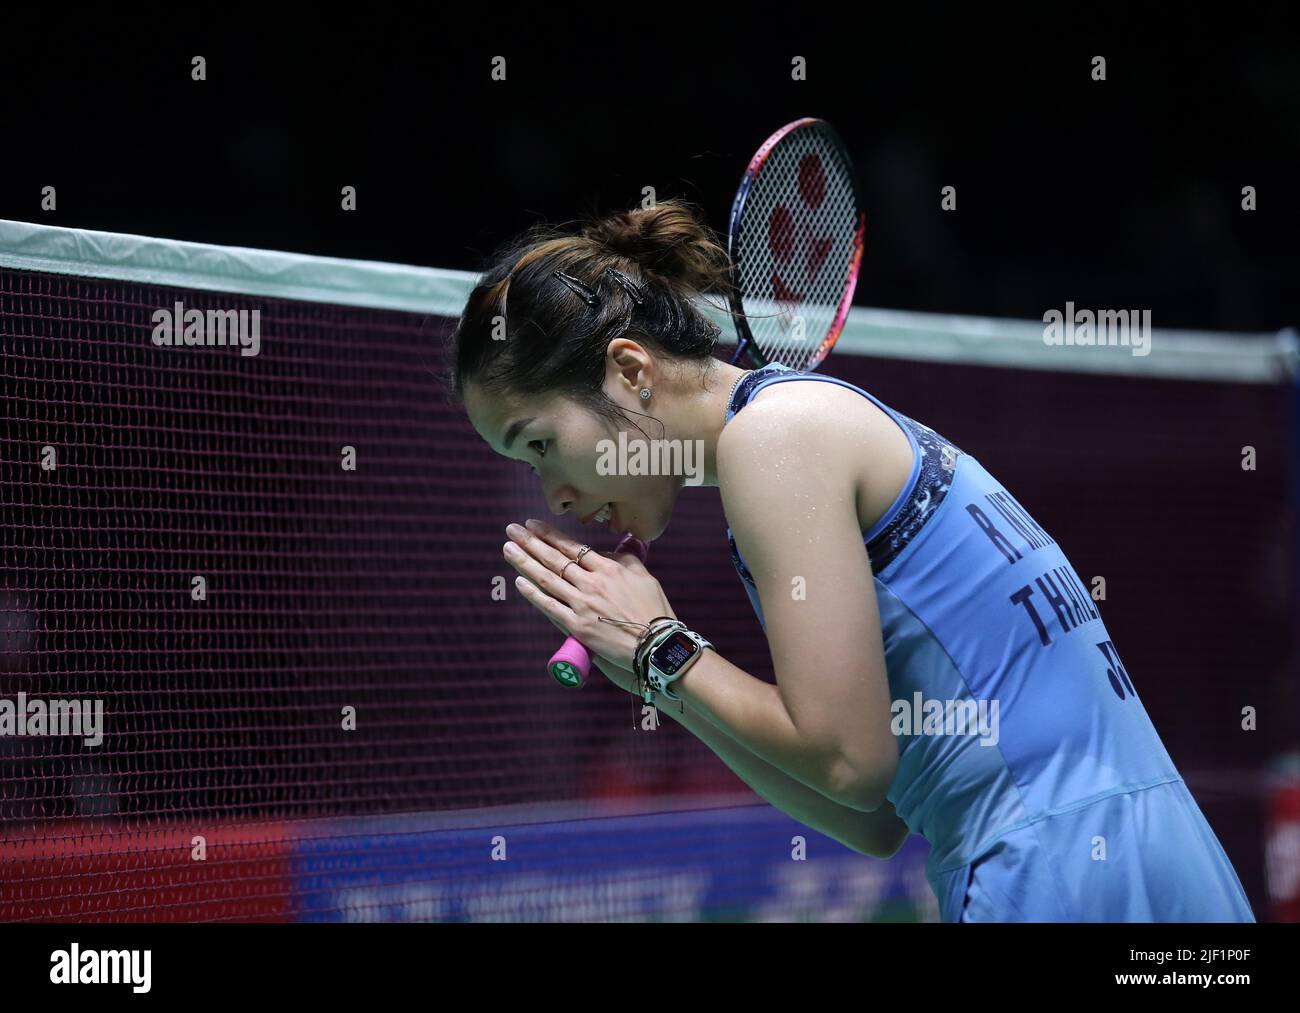 Kuala Lumpur, Malaysia. 28th June, 2022. Ratchanok Intanon of Thailand  celebrates after defeating Sim Yu Jin of Korea during the Women's Single  round one match of the Petronas Malaysia Open 2022 at